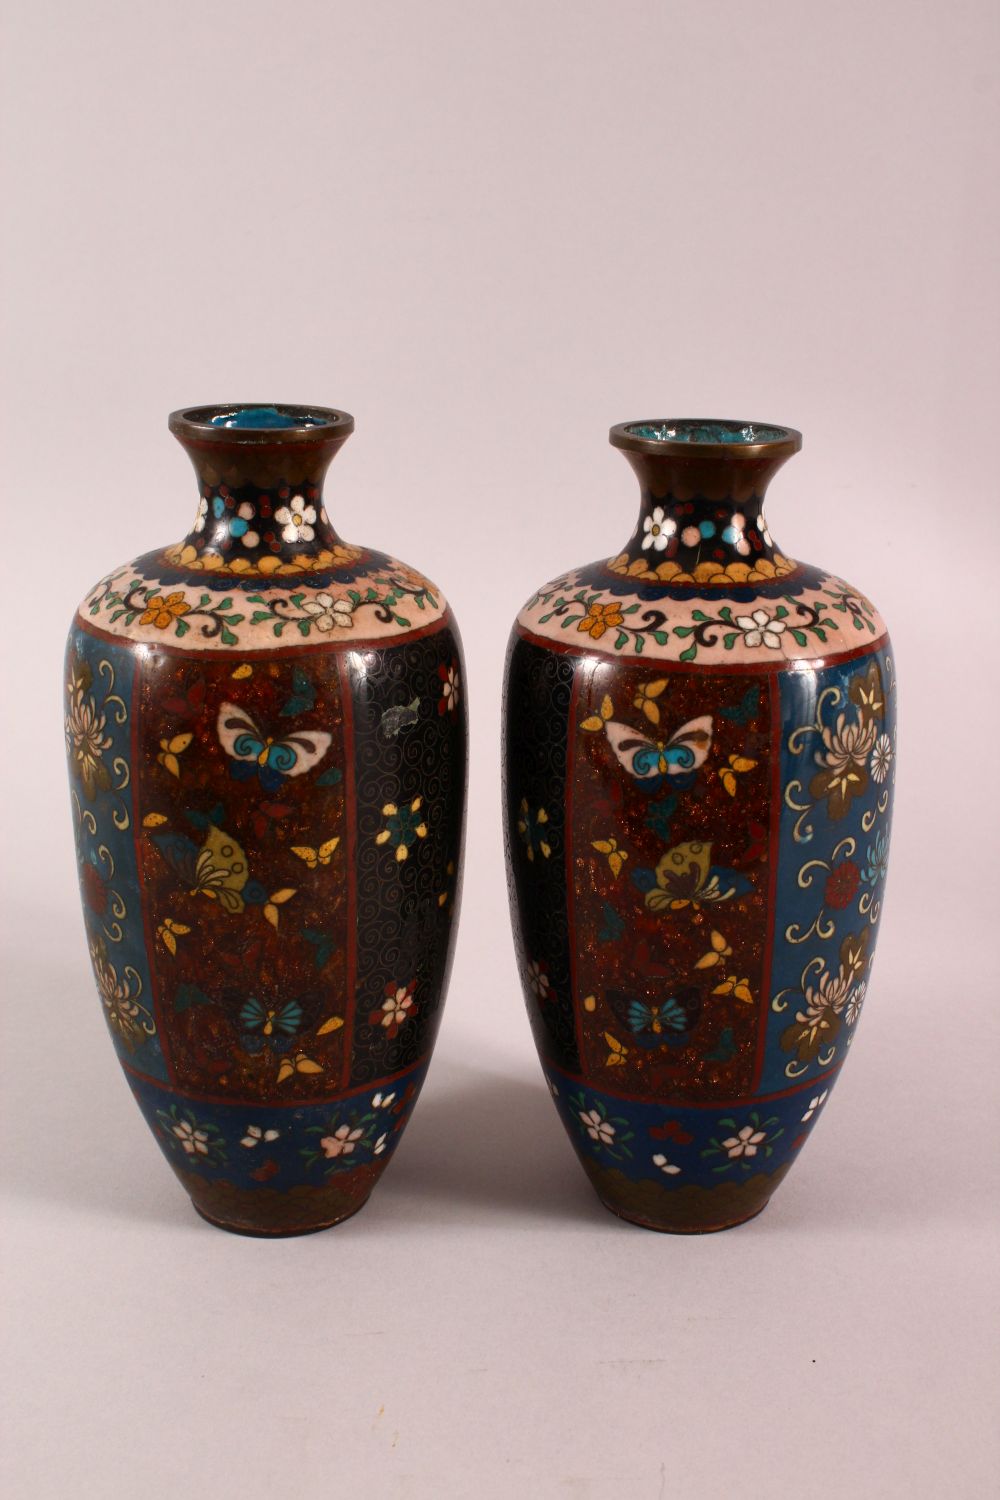 A PAIR OF JAPANESE CLOISONNE VASES, decorated with phoenix, flowers and butterflies, 22cm high. - Image 3 of 6